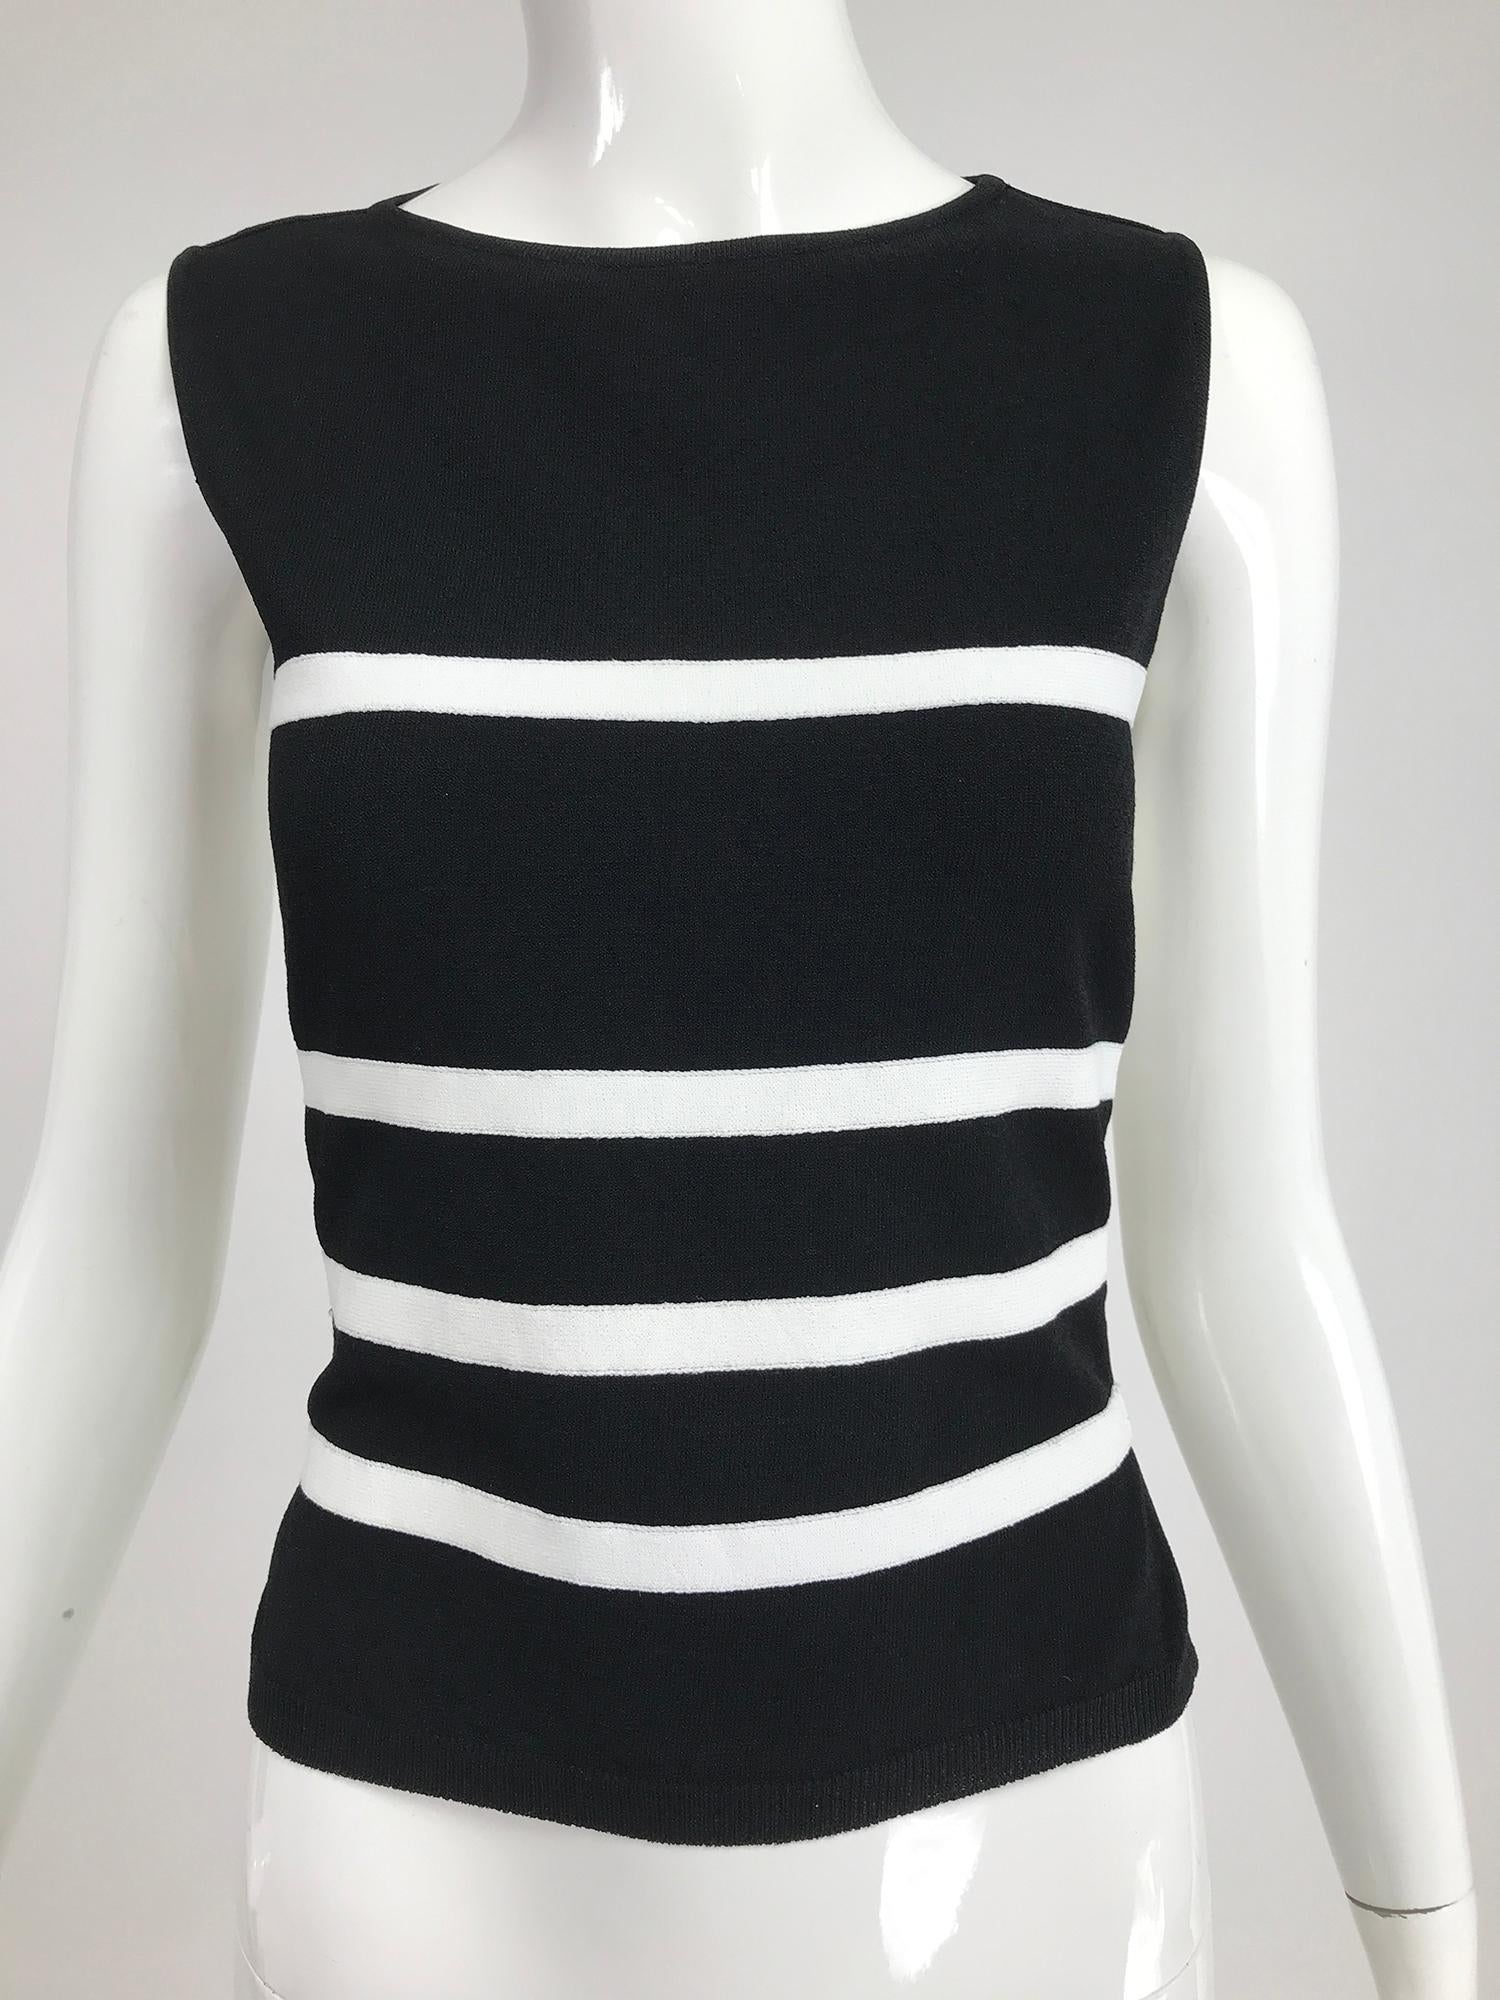 Moschino black & white stripe knit bare back top. Sleeveless top with a round neckline, the back covers the shoulder blades, below that there are 3 narrow white bands to the waist, your skin will be exposed between the white stripes. Great top in